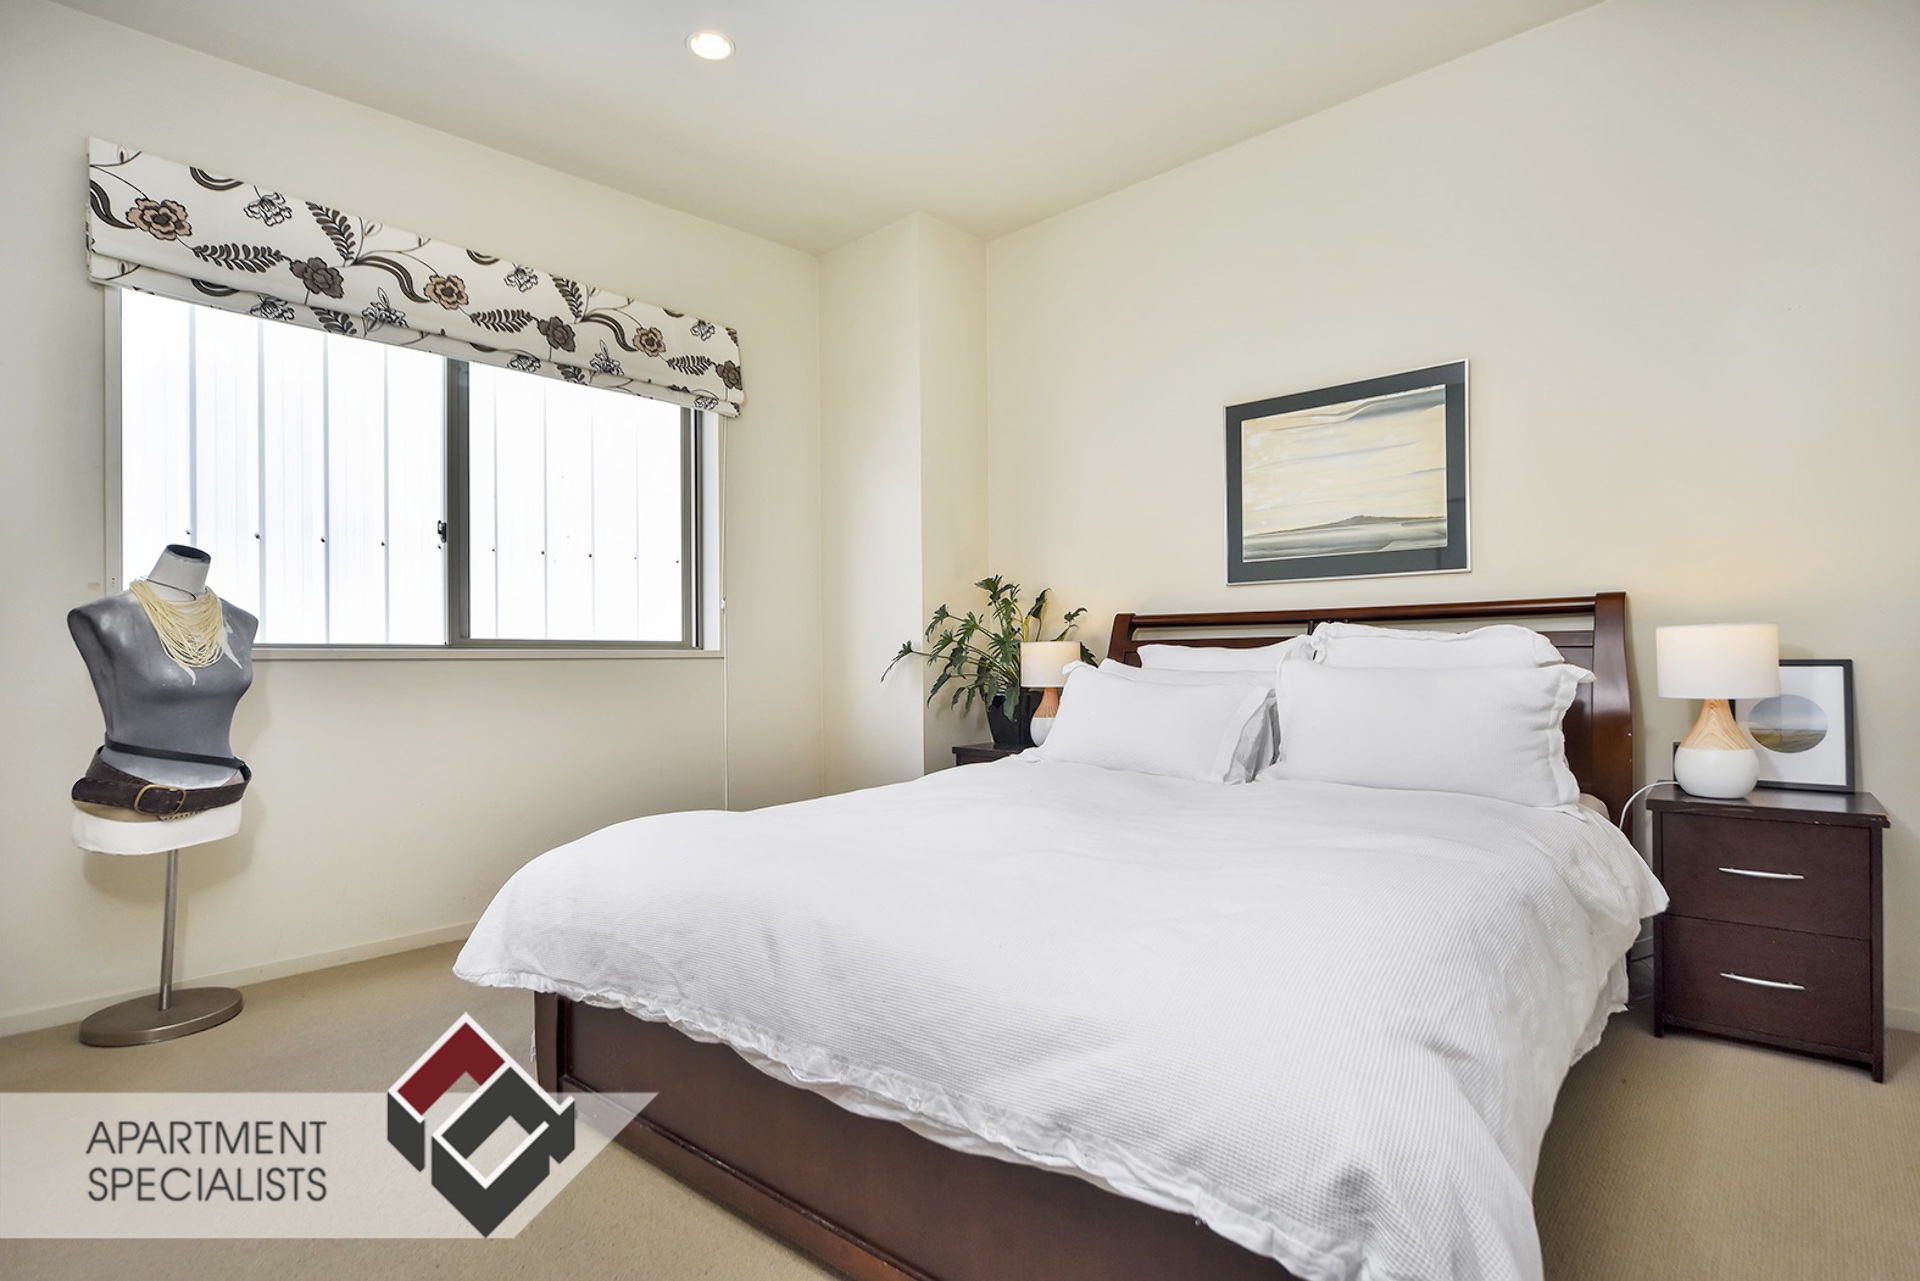 4 | 21 Hunters Park Drive, Three Kings | Apartment Specialists